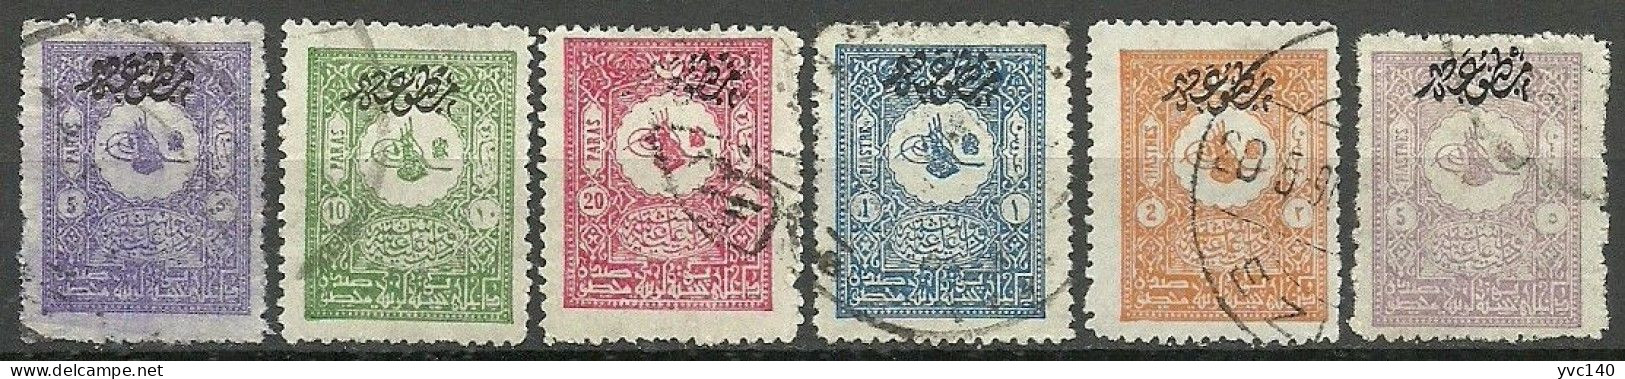 Turkey; 1901 Overprinted Interior Postage Stamps For Printed Matter (Complete Set) - Used Stamps